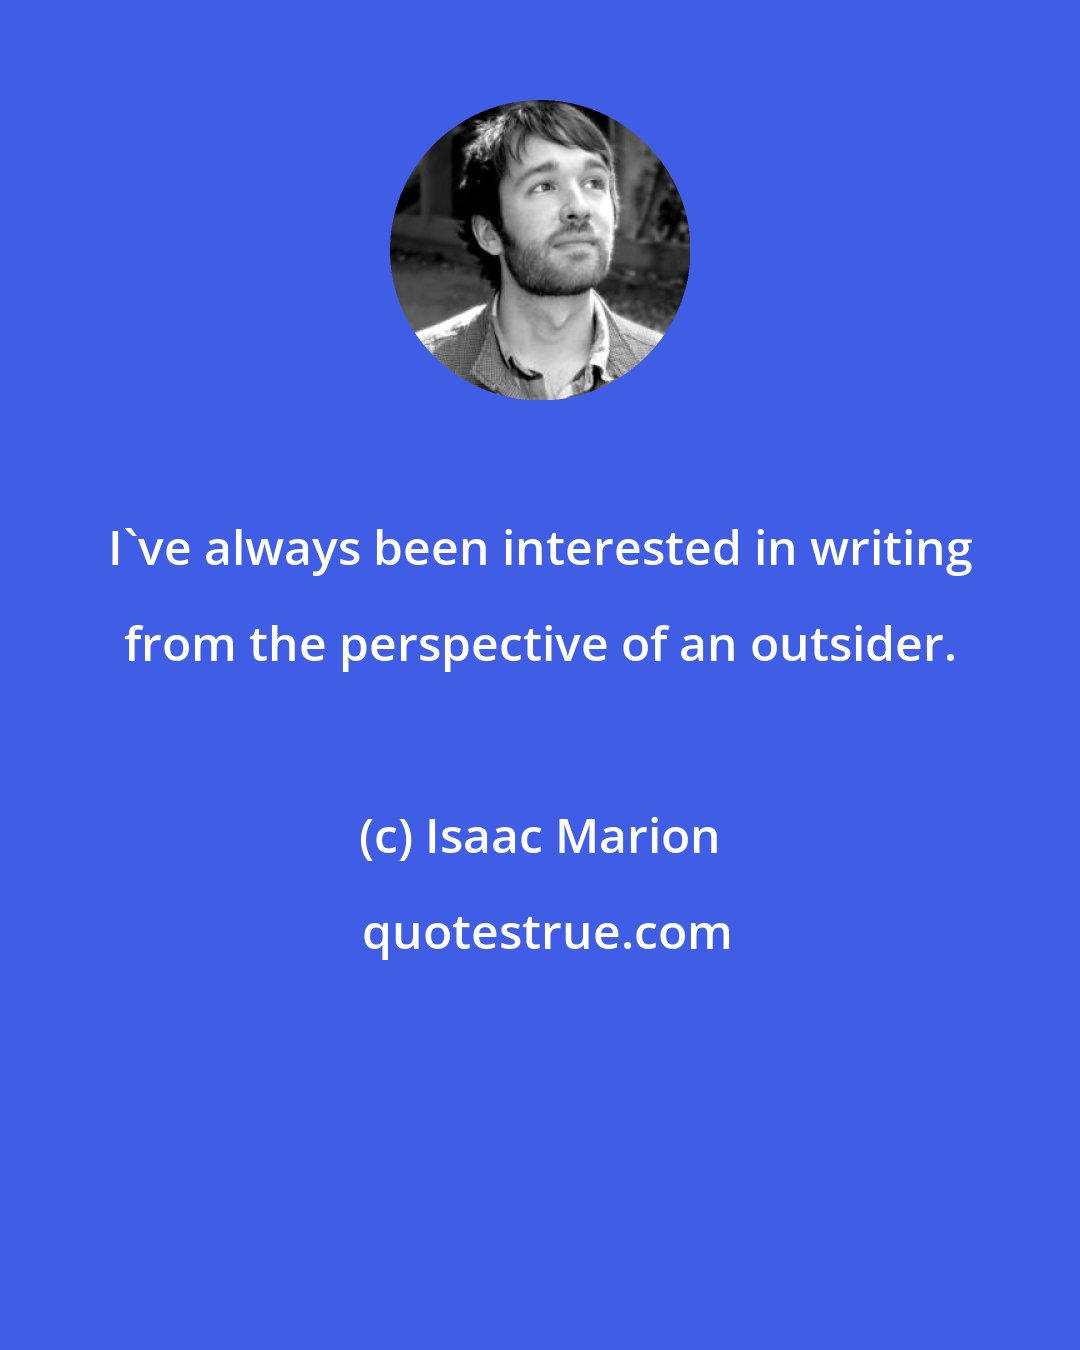 Isaac Marion: I've always been interested in writing from the perspective of an outsider.